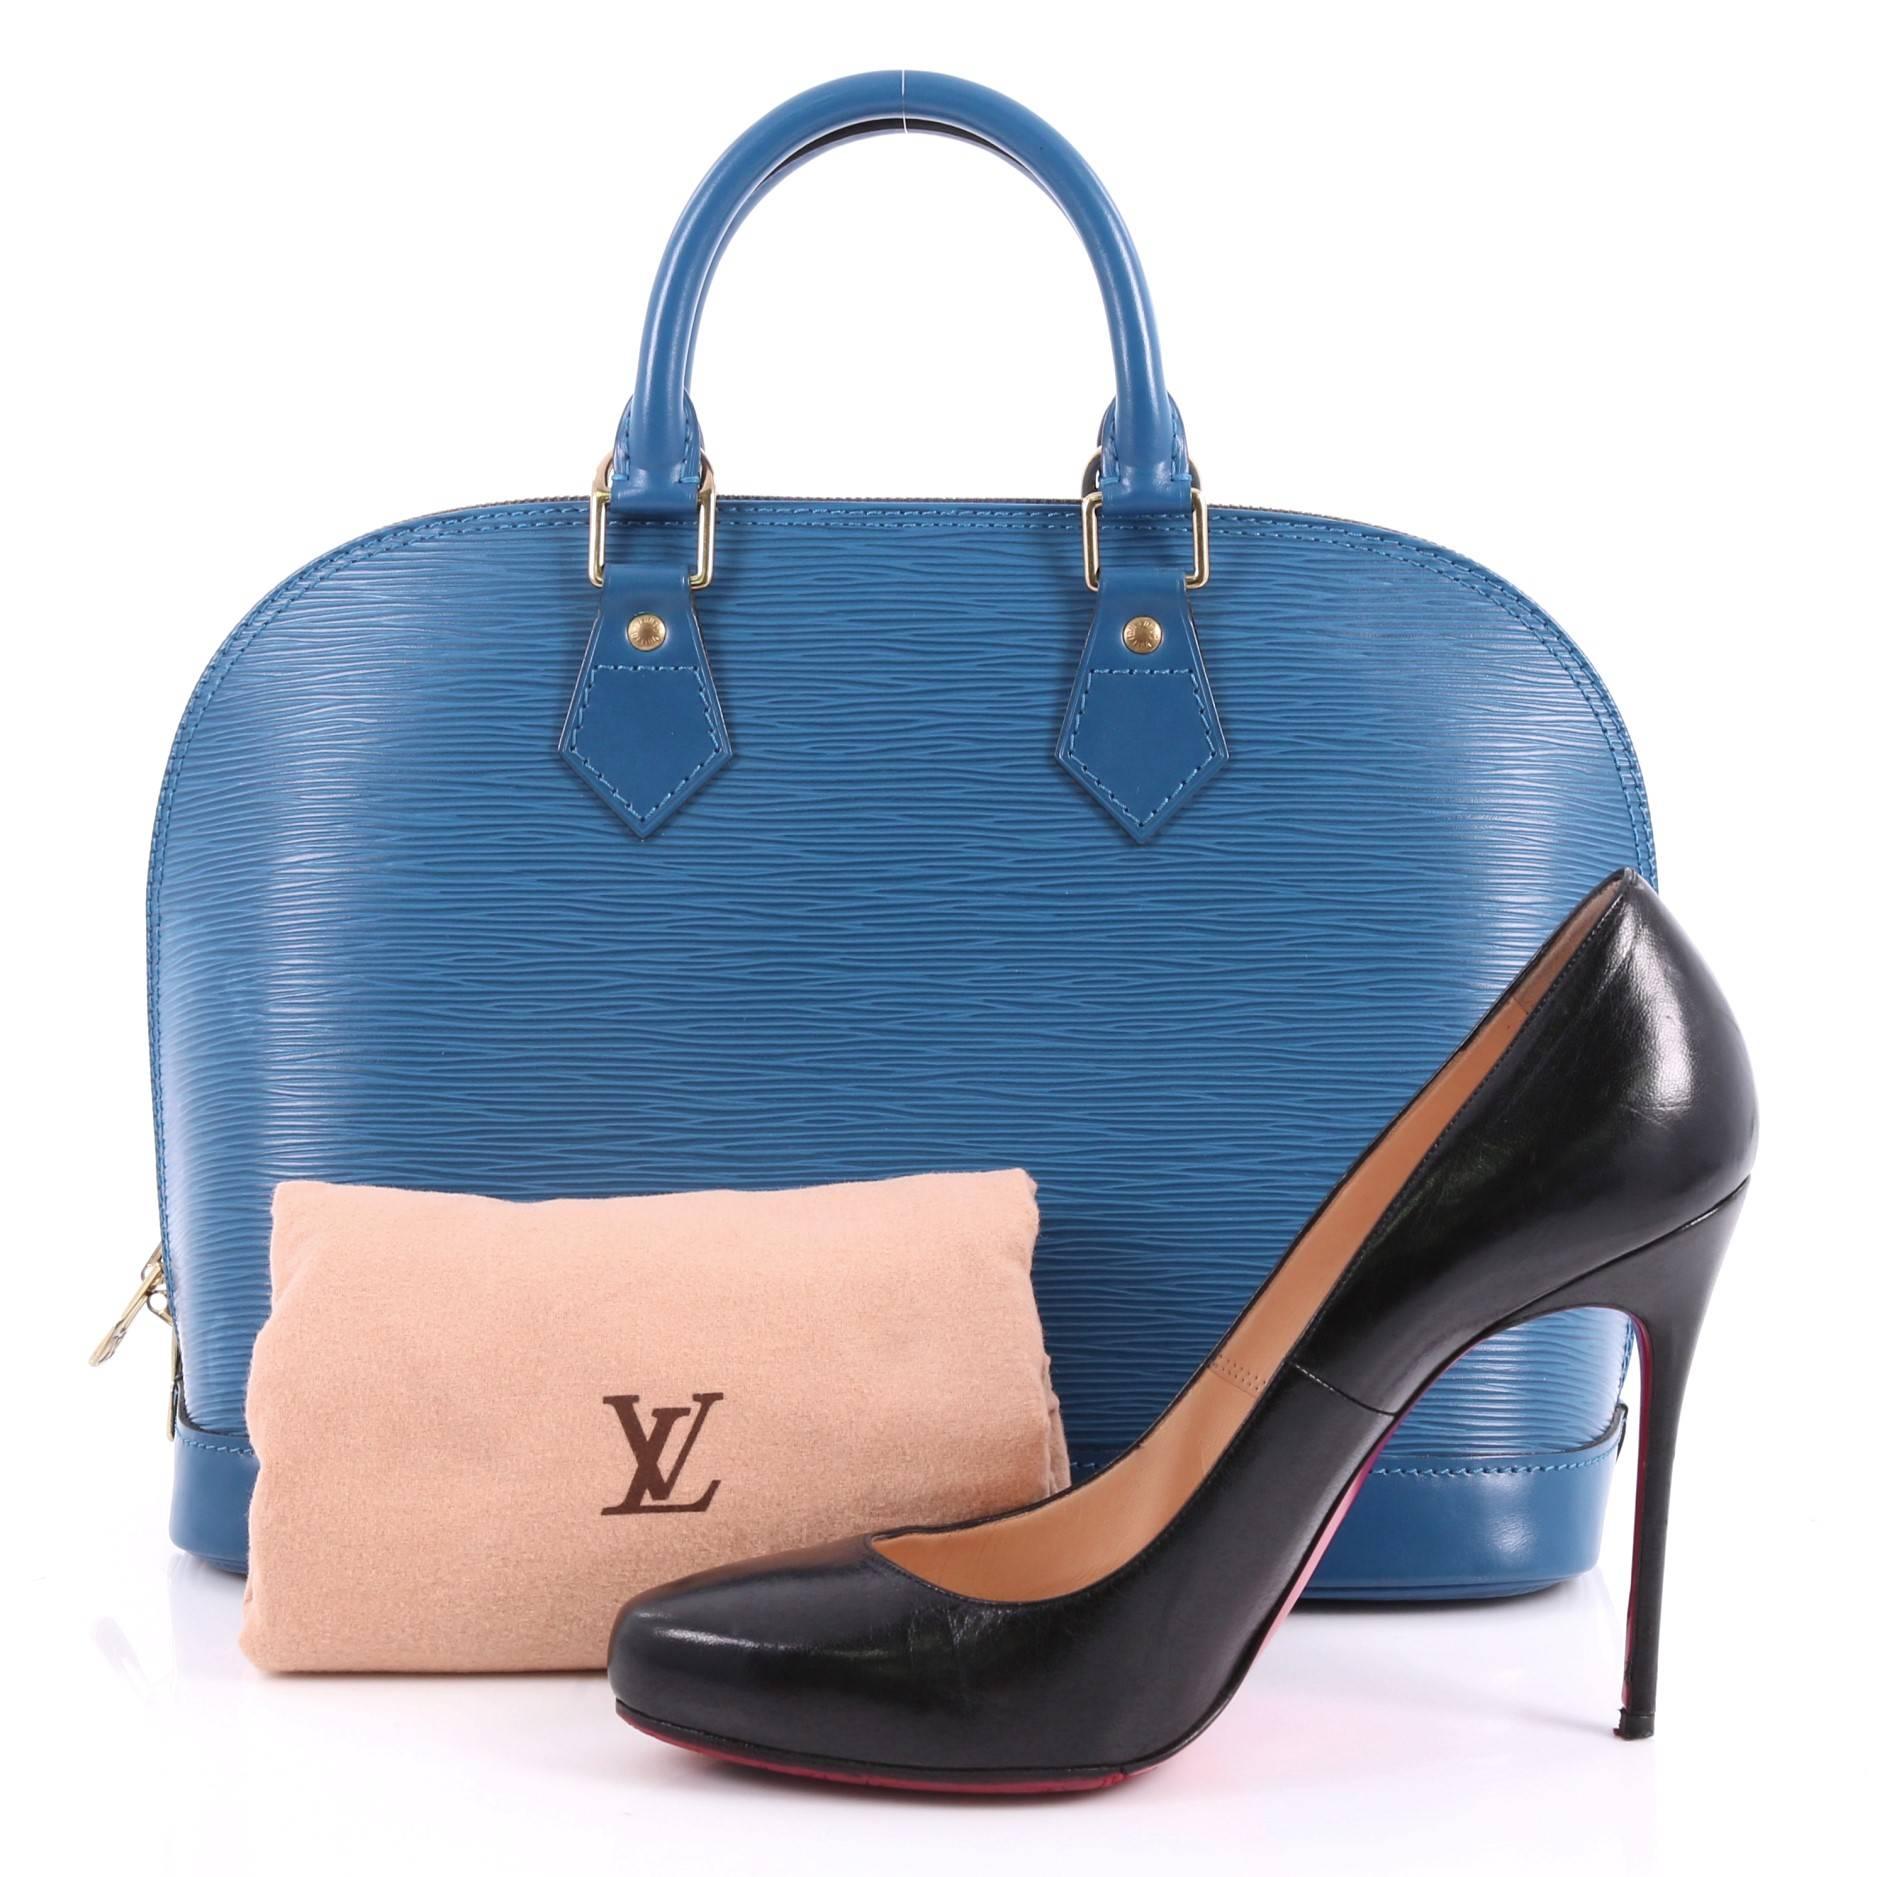 This authentic Louis Vuitton Vintage Alma Handbag Epi Leather PM is elegant and classic. Constructed with Louis Vuitton's signature blue epi leather, this iconic bag features dual rolled handles, a sturdy reinforced base, standout contrast